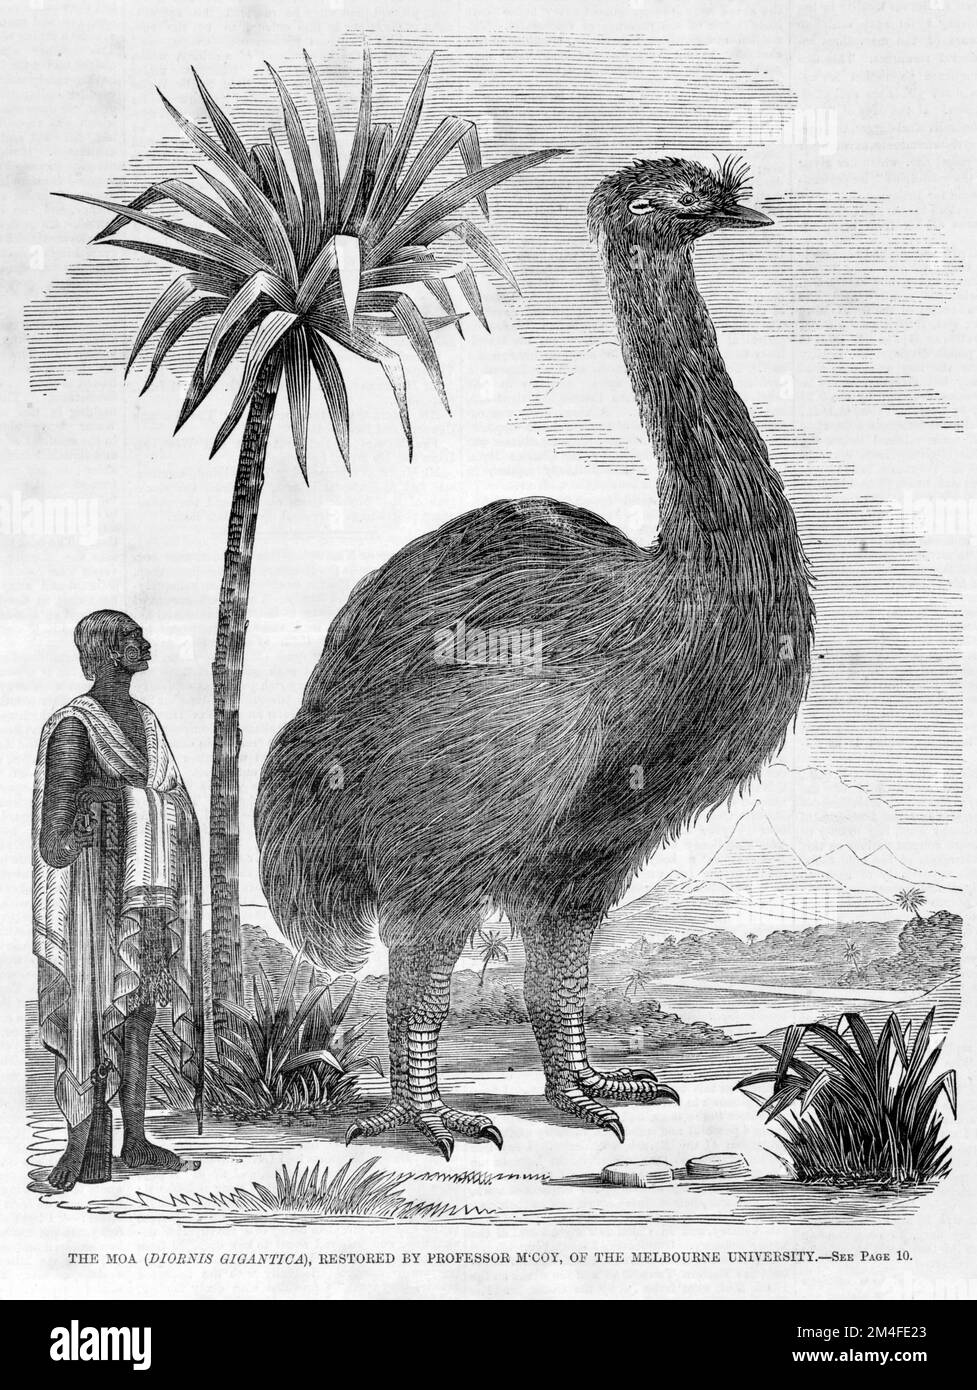 The Moa (diornis Gigantica). Shows a very large flightless bird previously indigenous to New Zealand. Illustration from the Australlian newspaper from 1864. Stock Photo